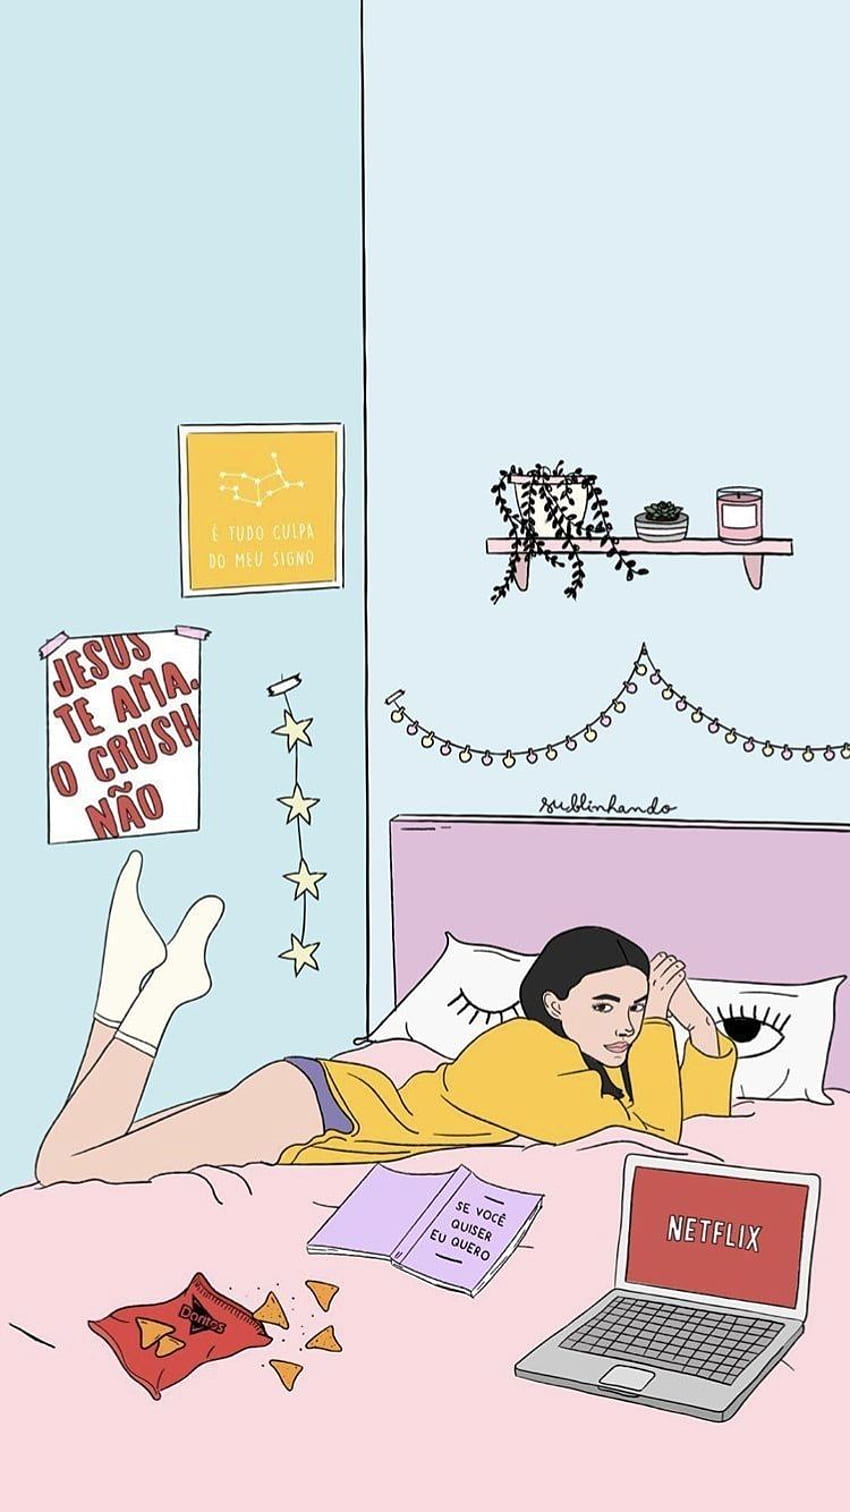 Illustration of a woman lying on a bed with a laptop and netflix - Doritos, Netflix, illustration